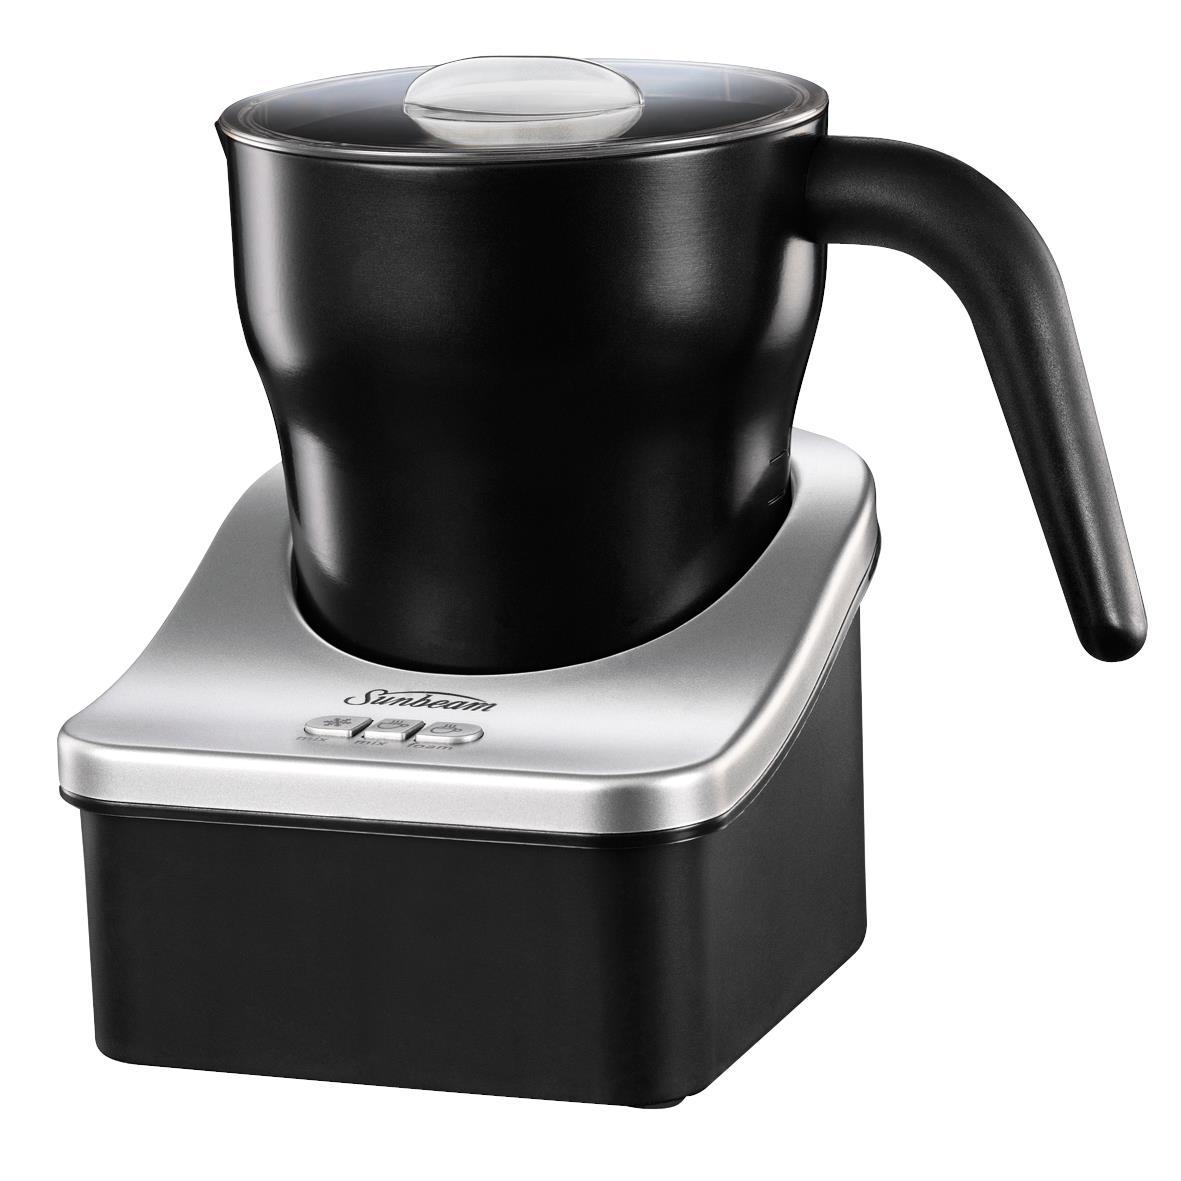 Image of Sunbeam EM0180 Cafe Creamy Automatic Milk Frother